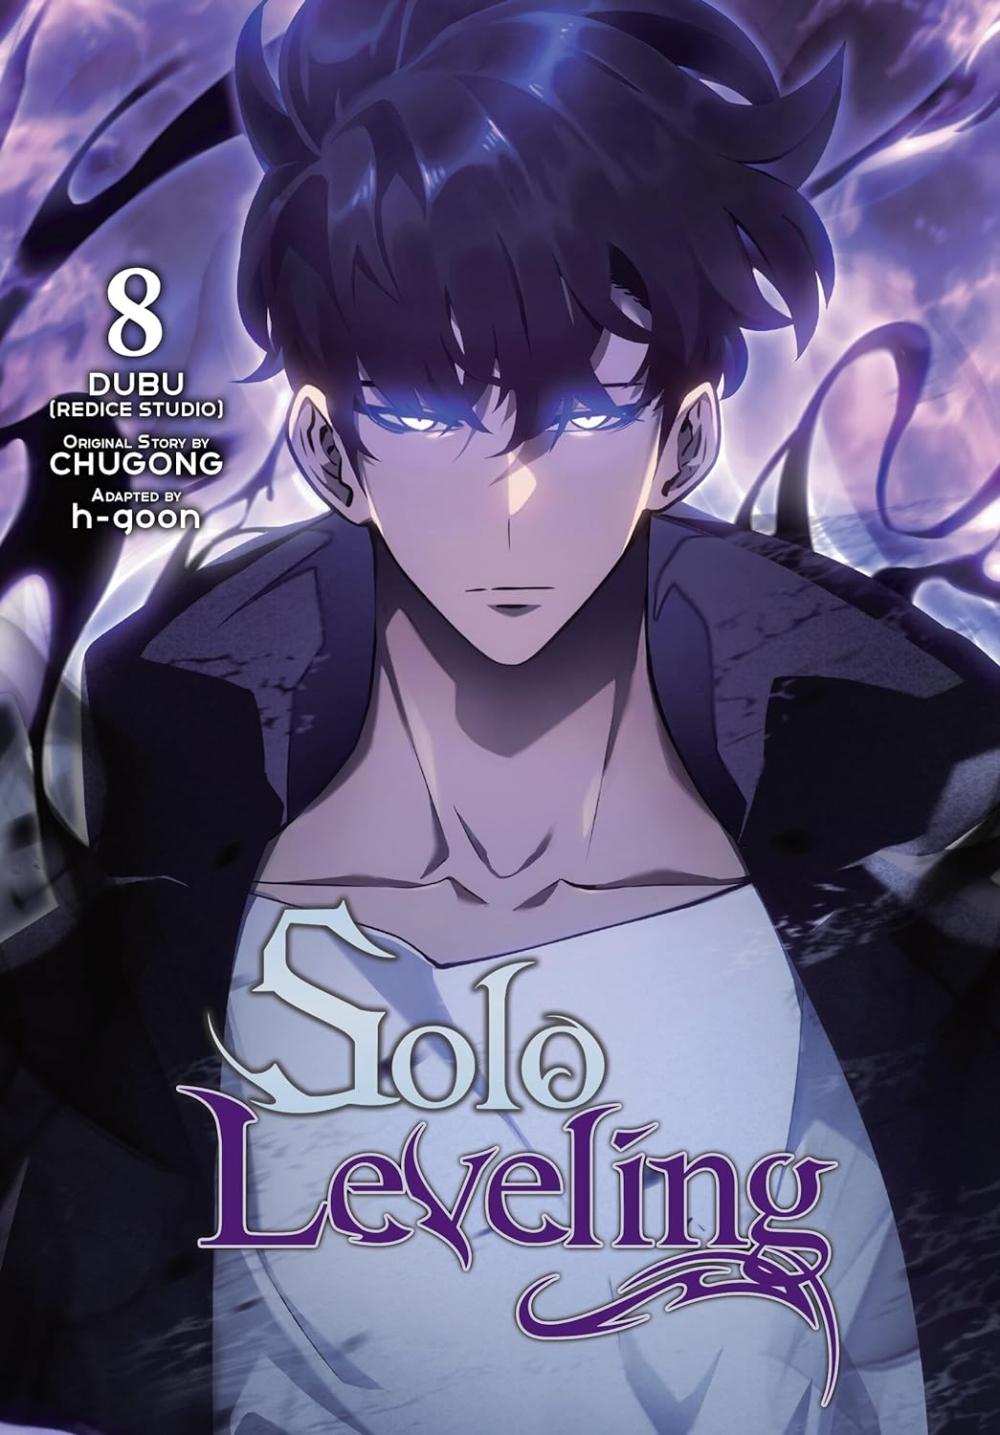 Solo Leveling Tome 12